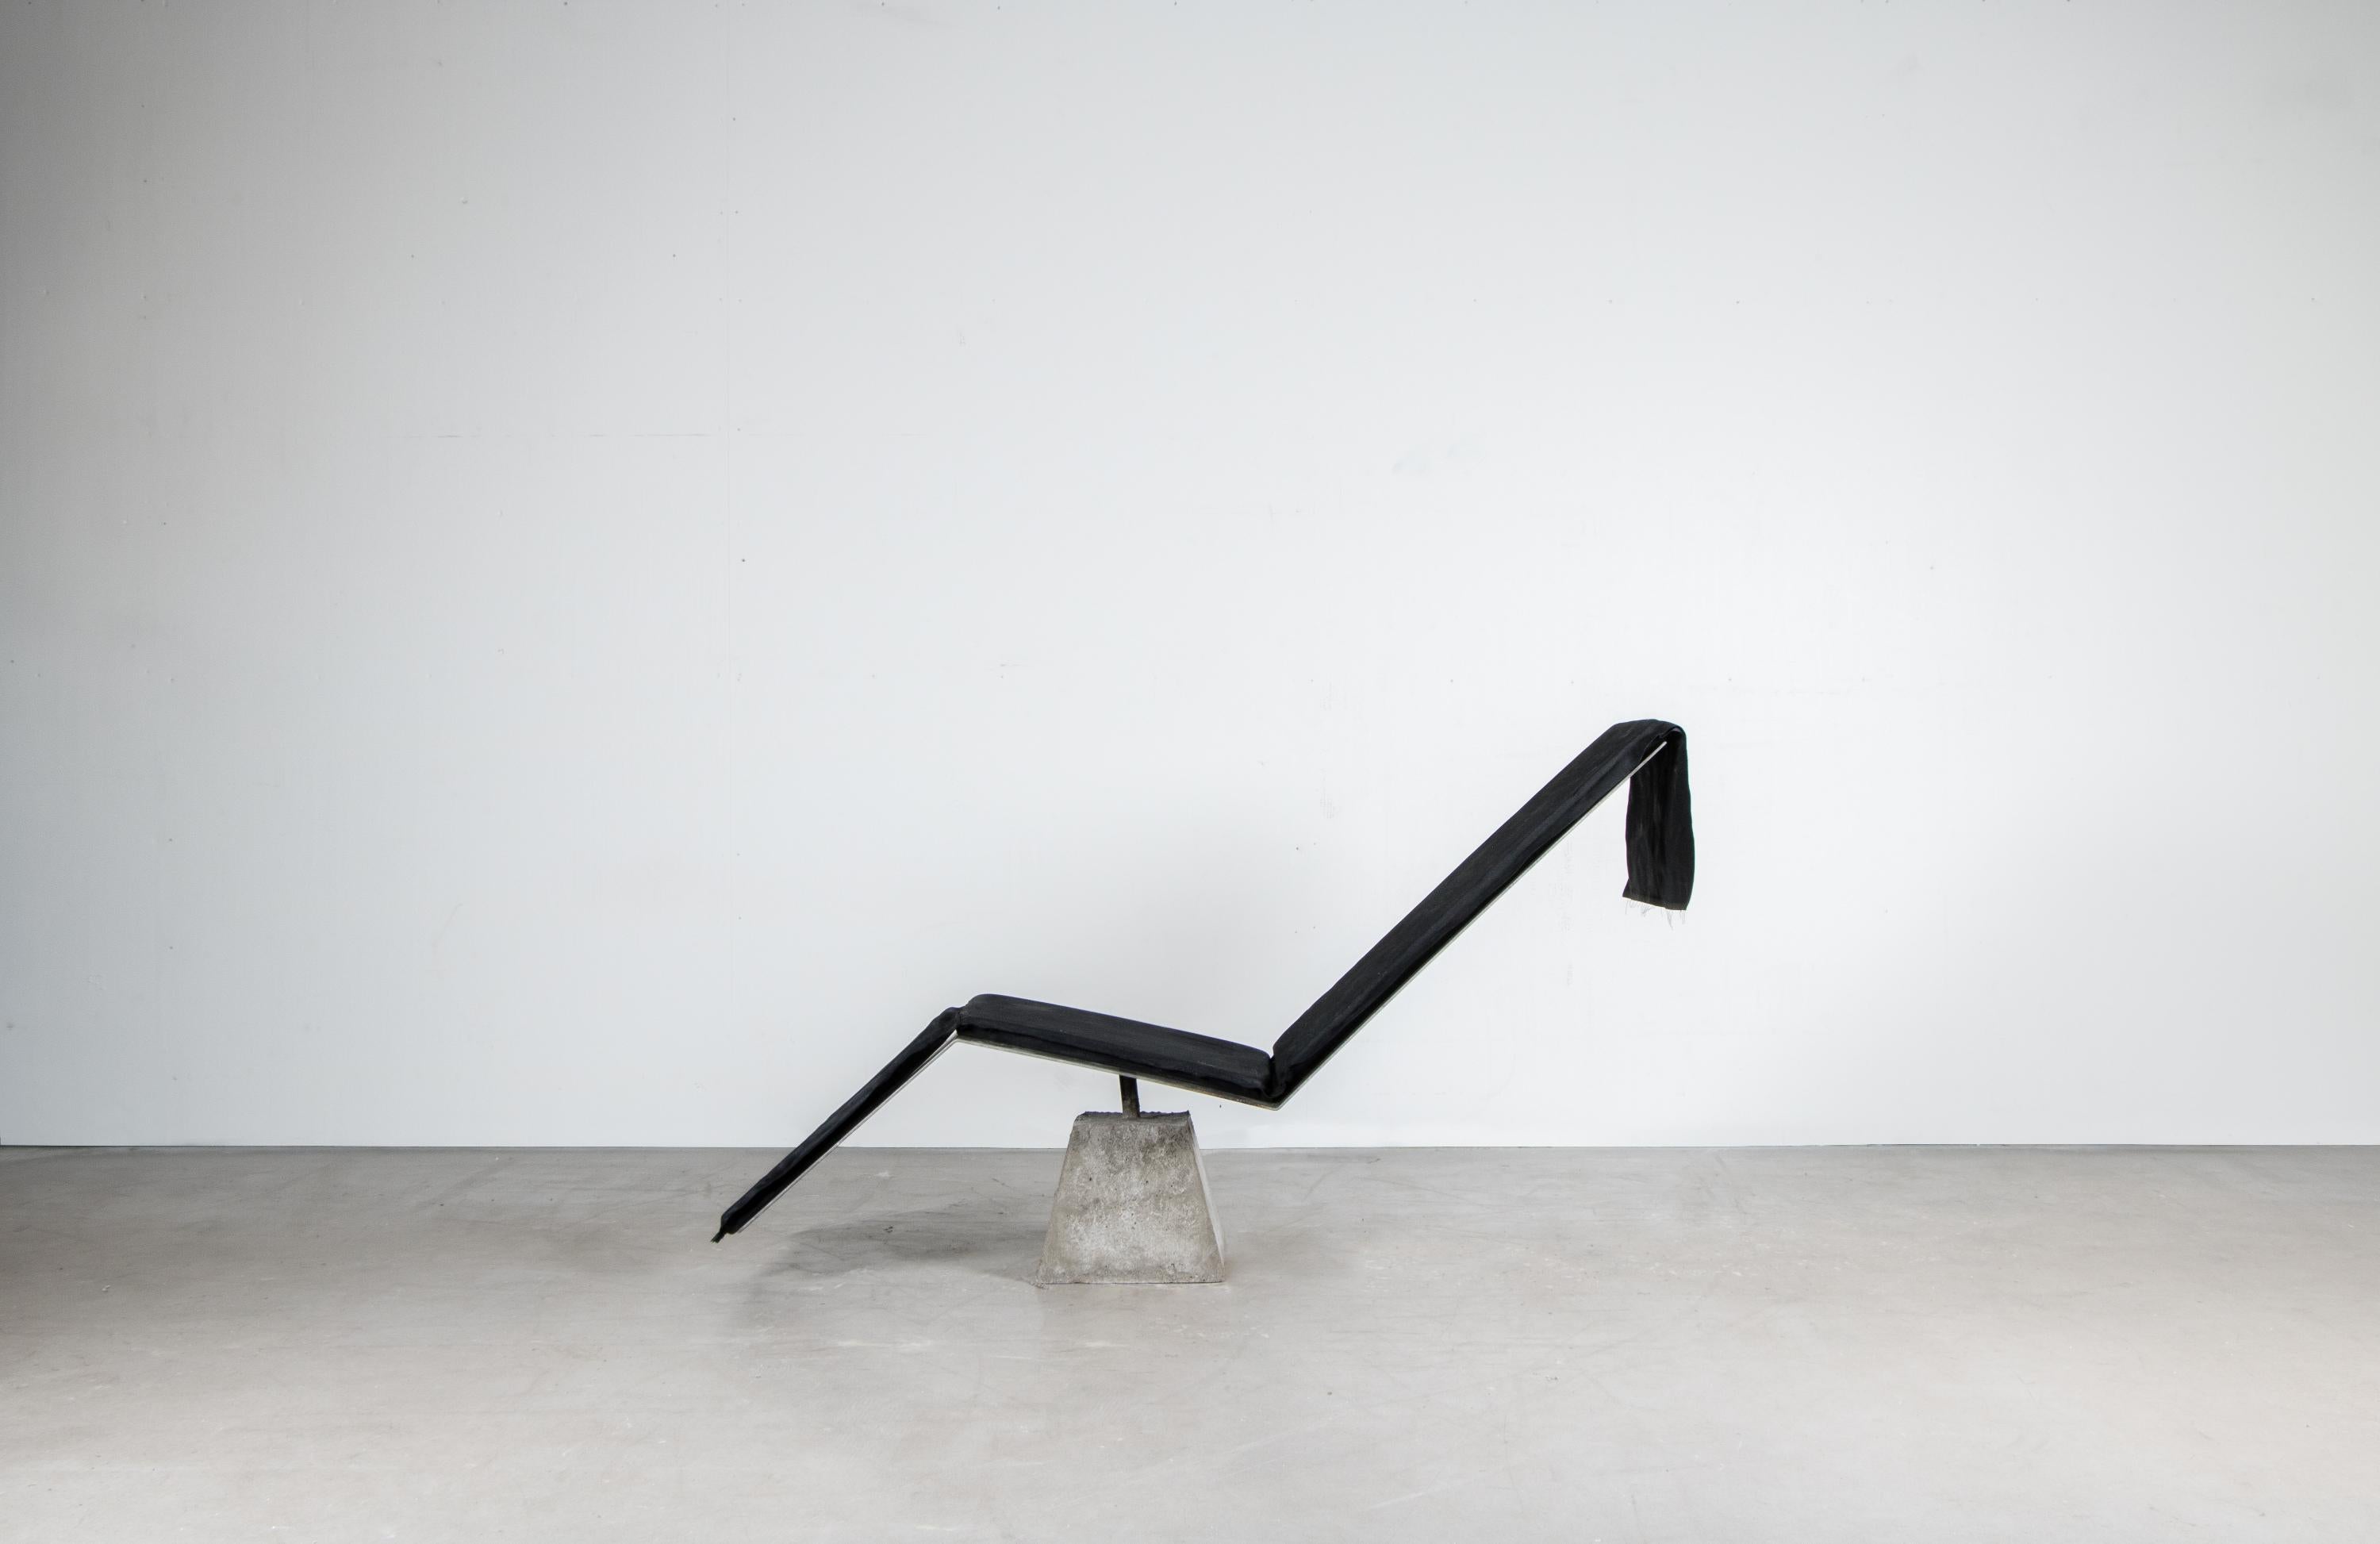 Flykt chair by Lucas Tyra Morten
2020
Limited edition of 17
Dimensions: 150 H 83 W 50 cm
Material: Concrete, burned waxed steel and hand-waxed upholstered cushion

With the vision to build a monument for escapism, flykt chair was sculpted from a